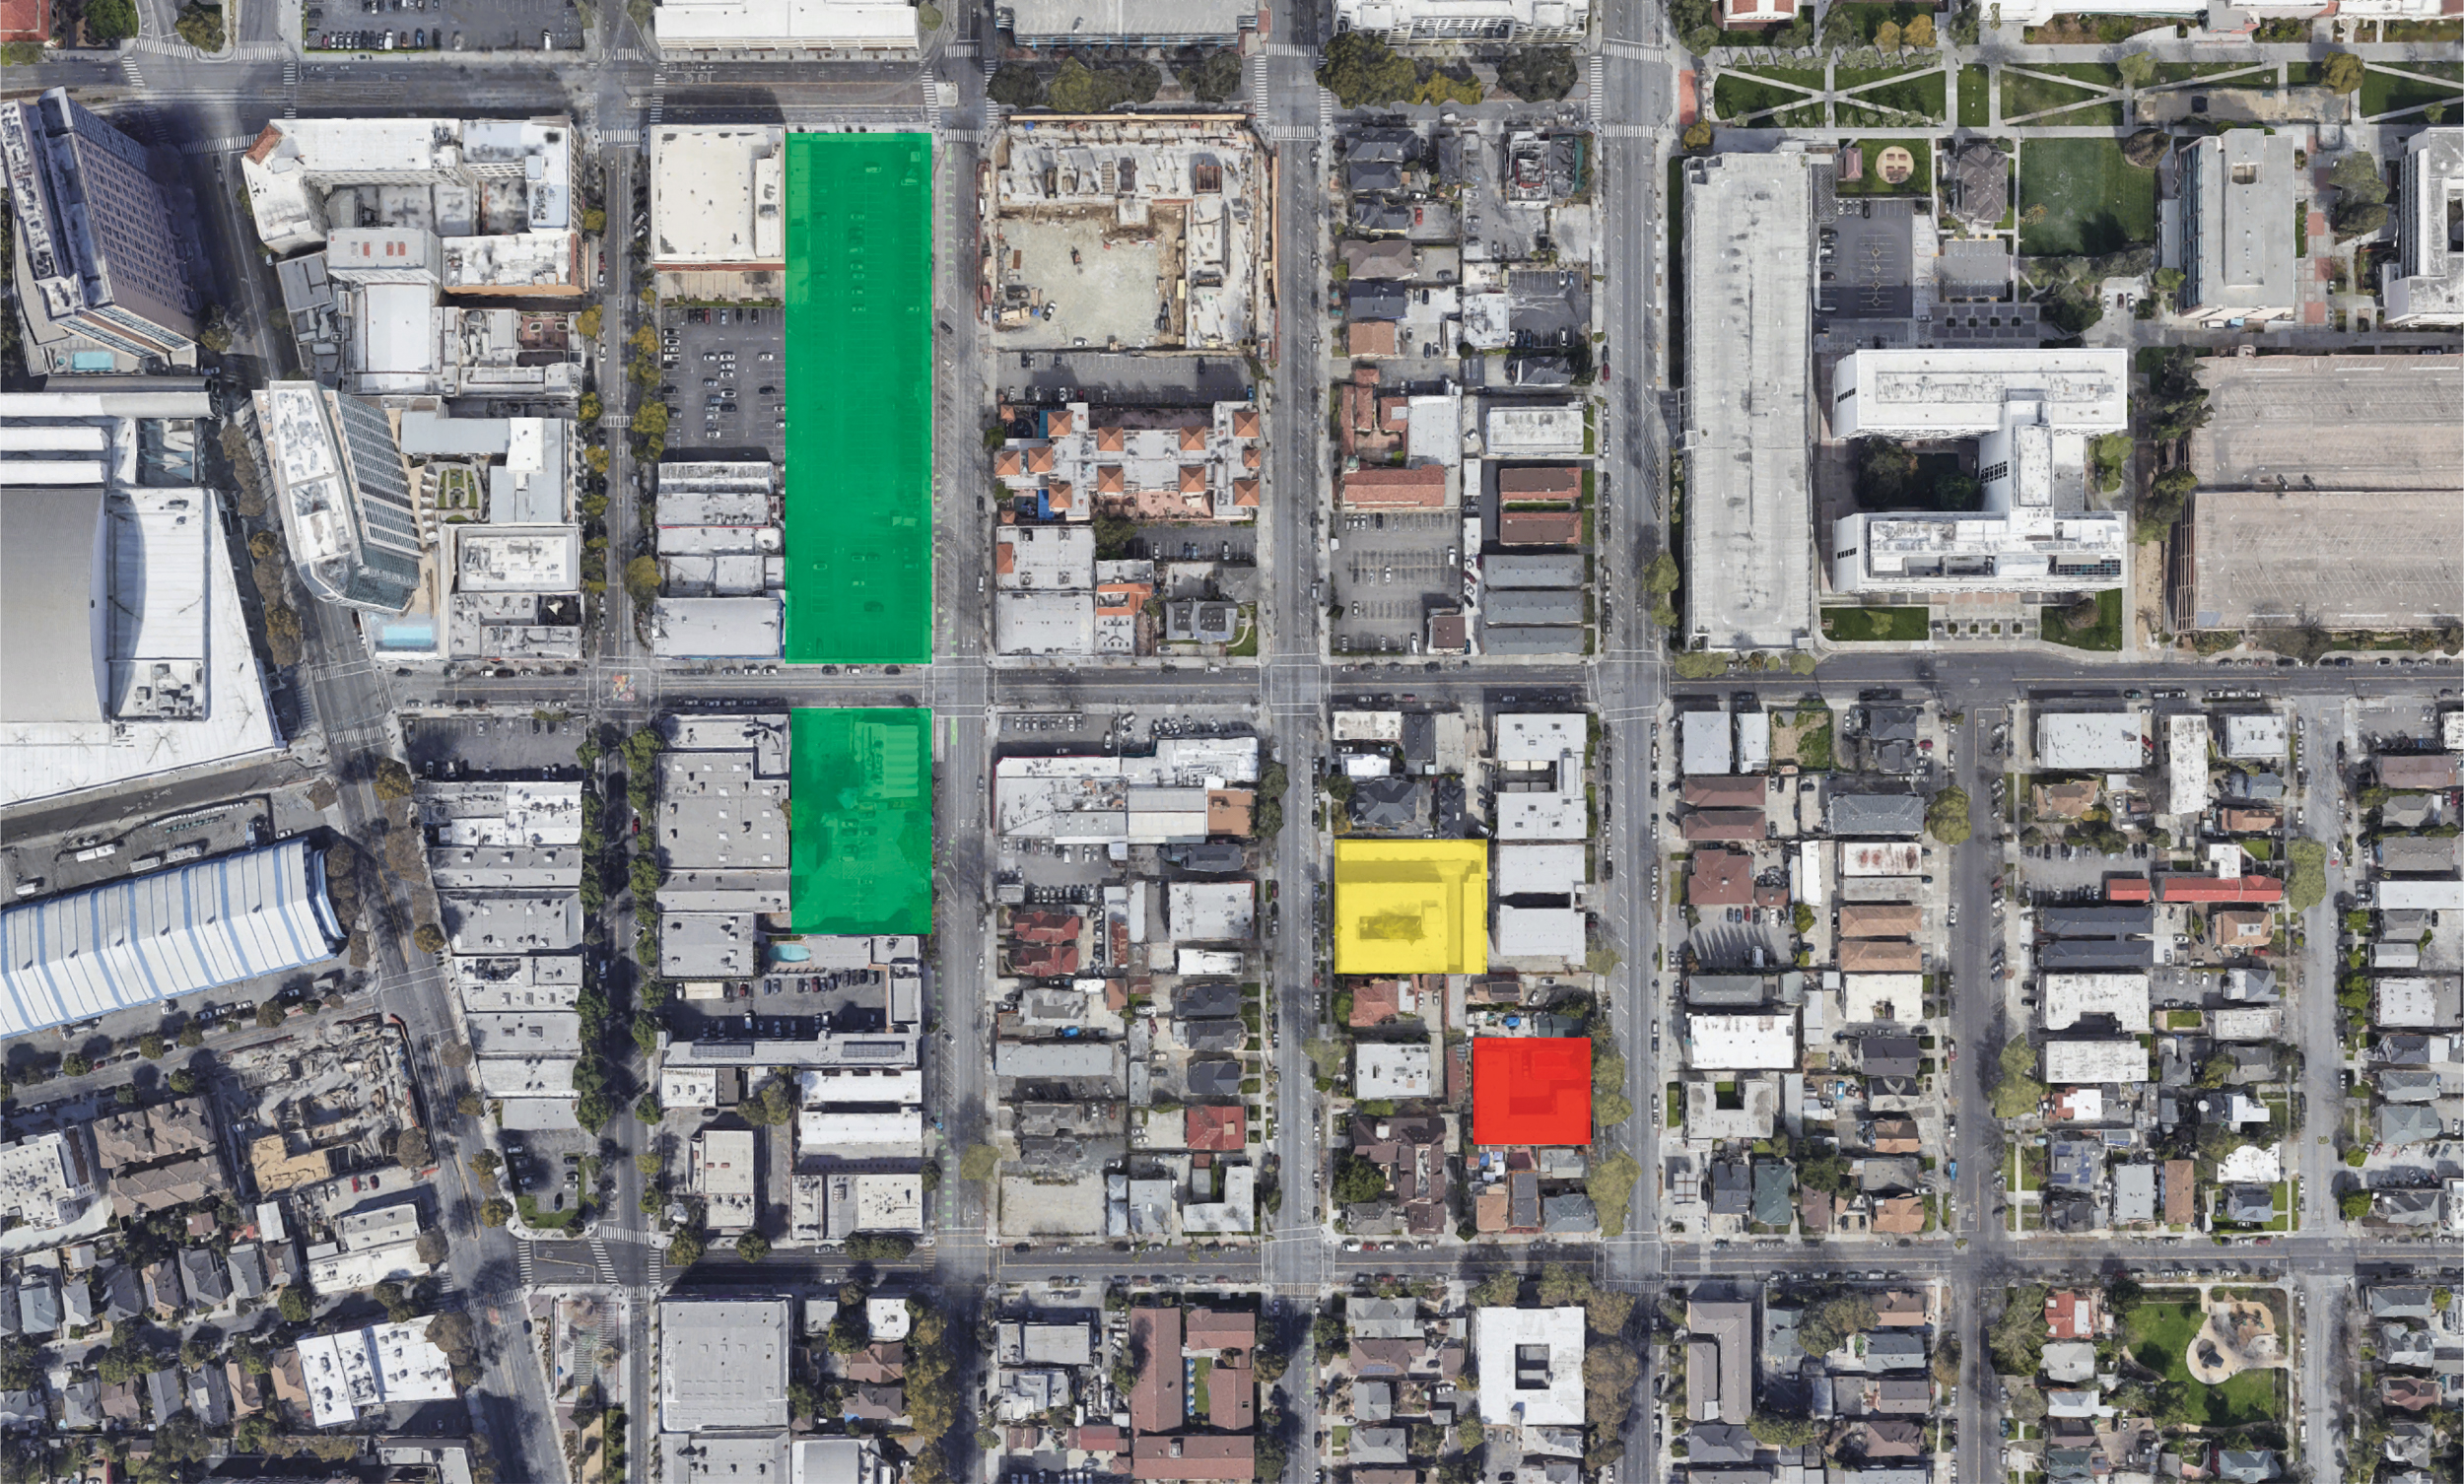 Map of development projects with 300 South 1st Street and 409 South 2nd Street highlighted green, 420 South 3rd Street highlighted in yellow, and 475 South 4th Street in red, image via Google Satellite